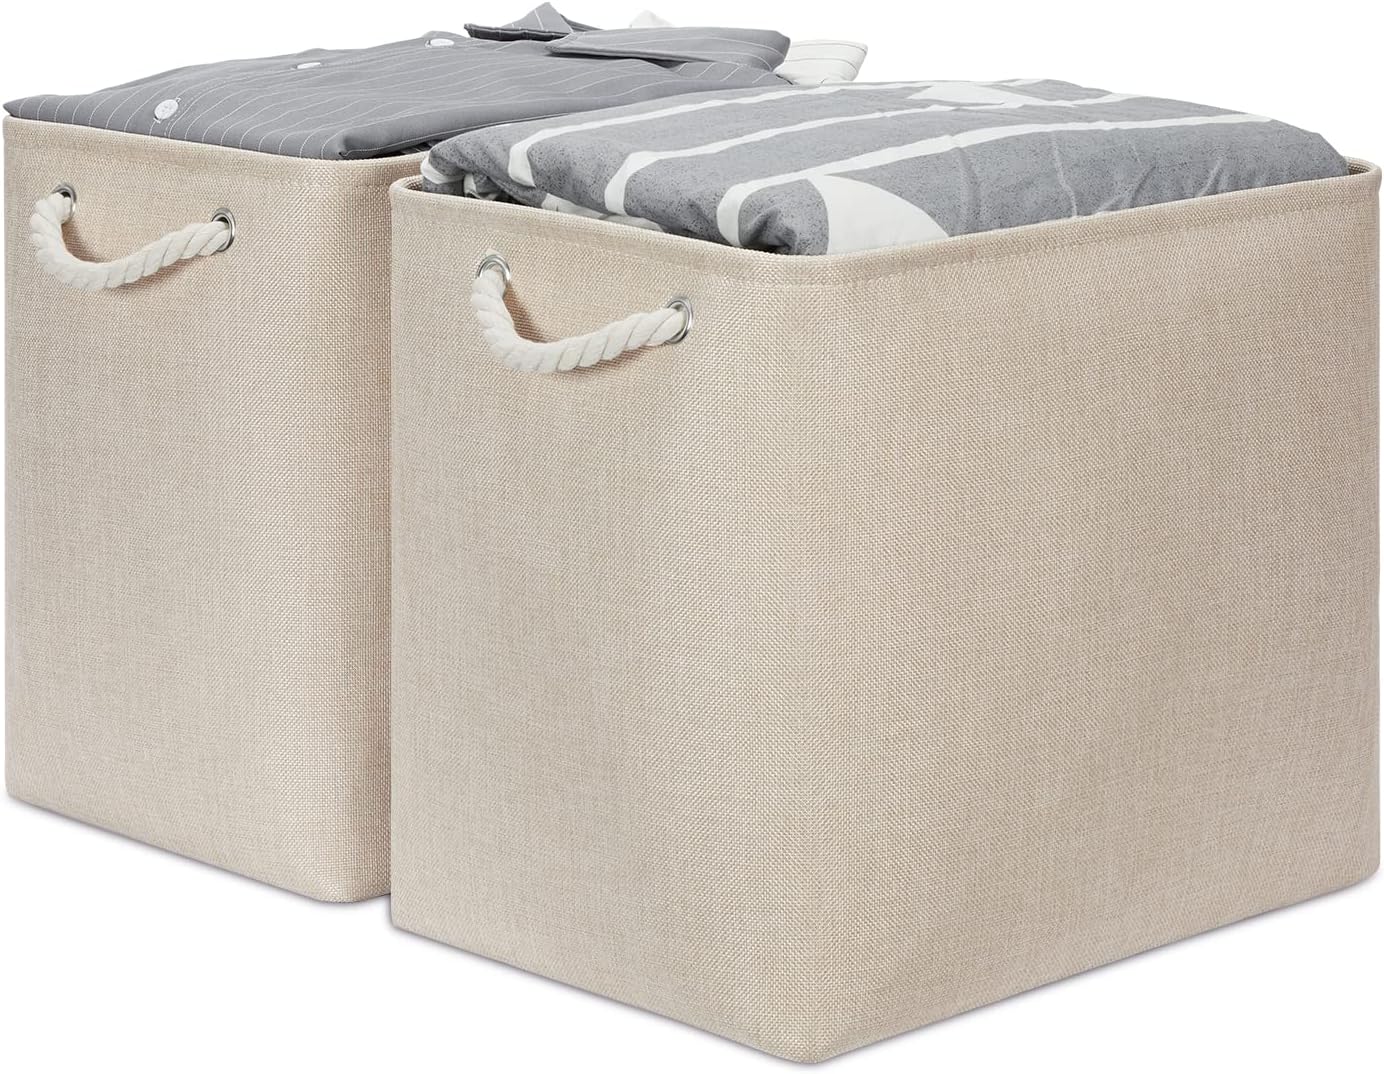 Temary Storage Baskets for Shelves 2PCs Extra Large Baskets for Blankets, Collapsible Storage Basket Cloth Baskets for Organizing, Fabric Basket for Nursery, Home (Beige, 17Lx12Wx15H Inches)